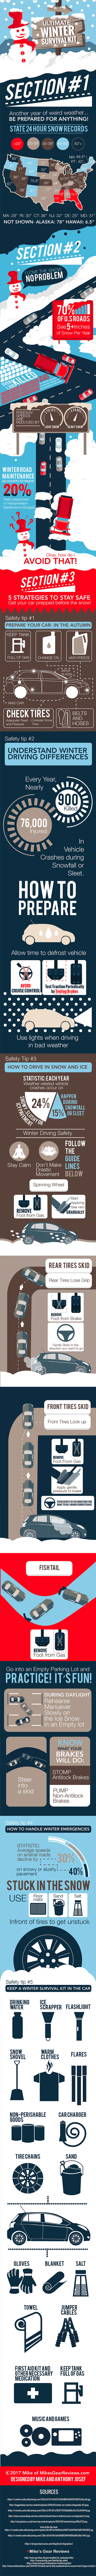 Winter Car Care infographic